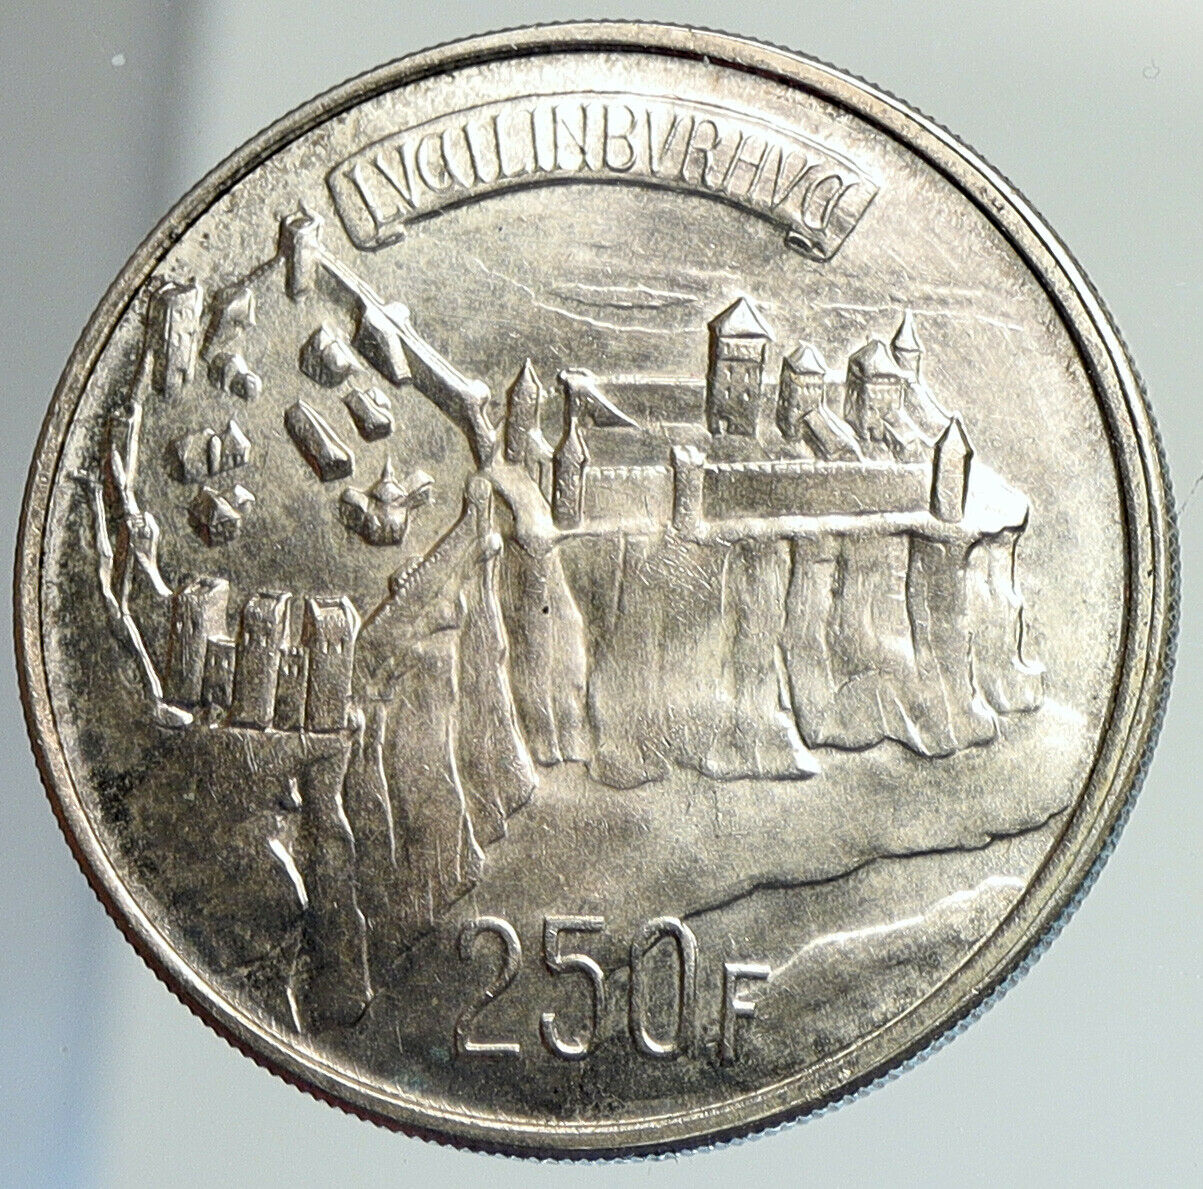 1963 BELGIUM Charlotte Millenium of Luxembourg OLD Silver 250 Franc Coin i112026